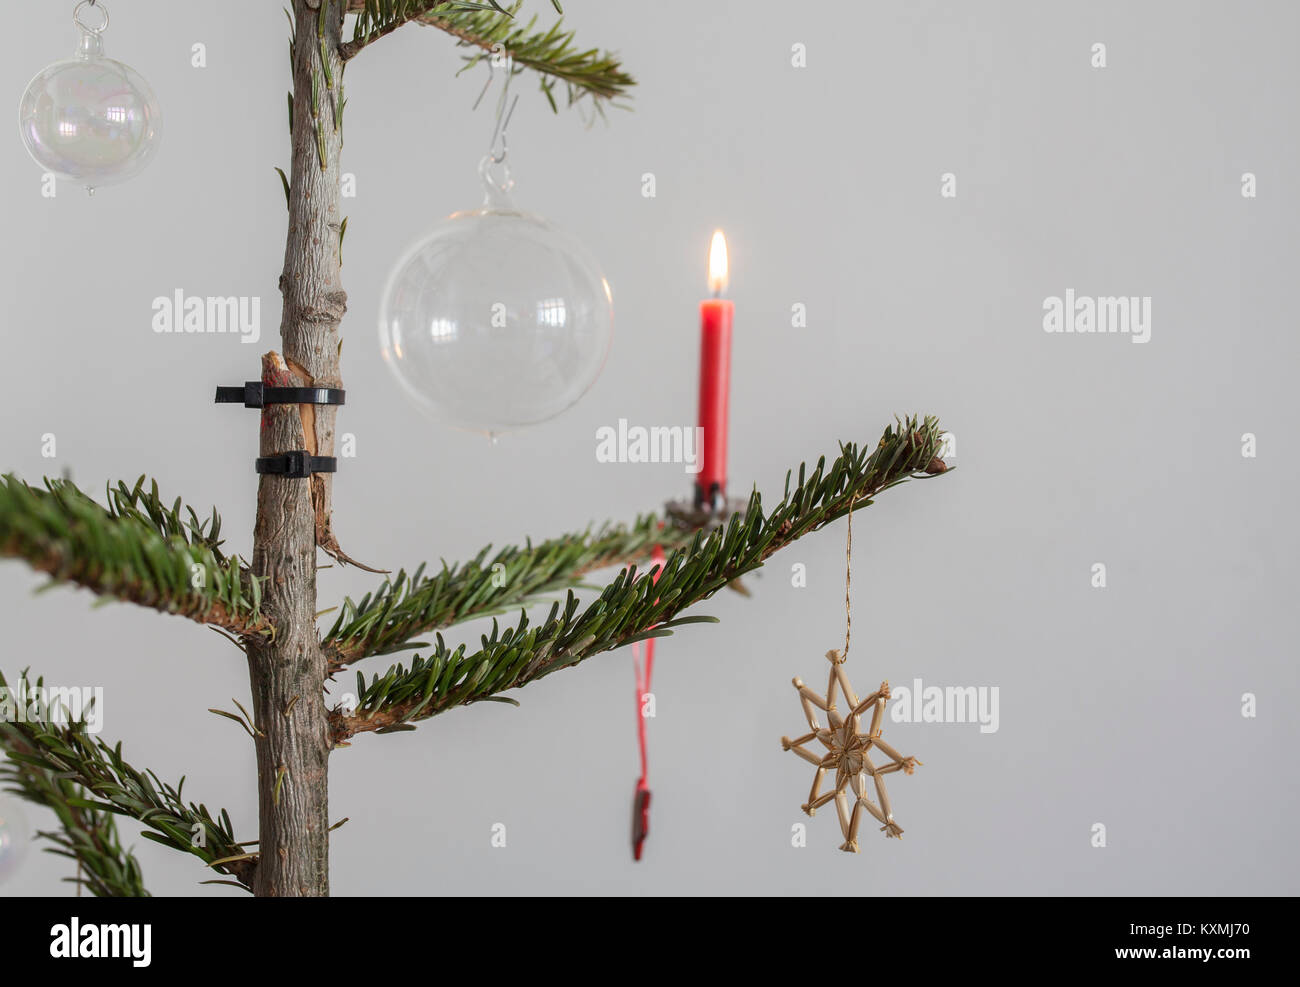 Christmas tree with candle and glass ball fixed with a cable tie – Mit einem Kabelbinder reparierter Weihnachtsbaum mit Kerze und Glaskugel Stock Photo